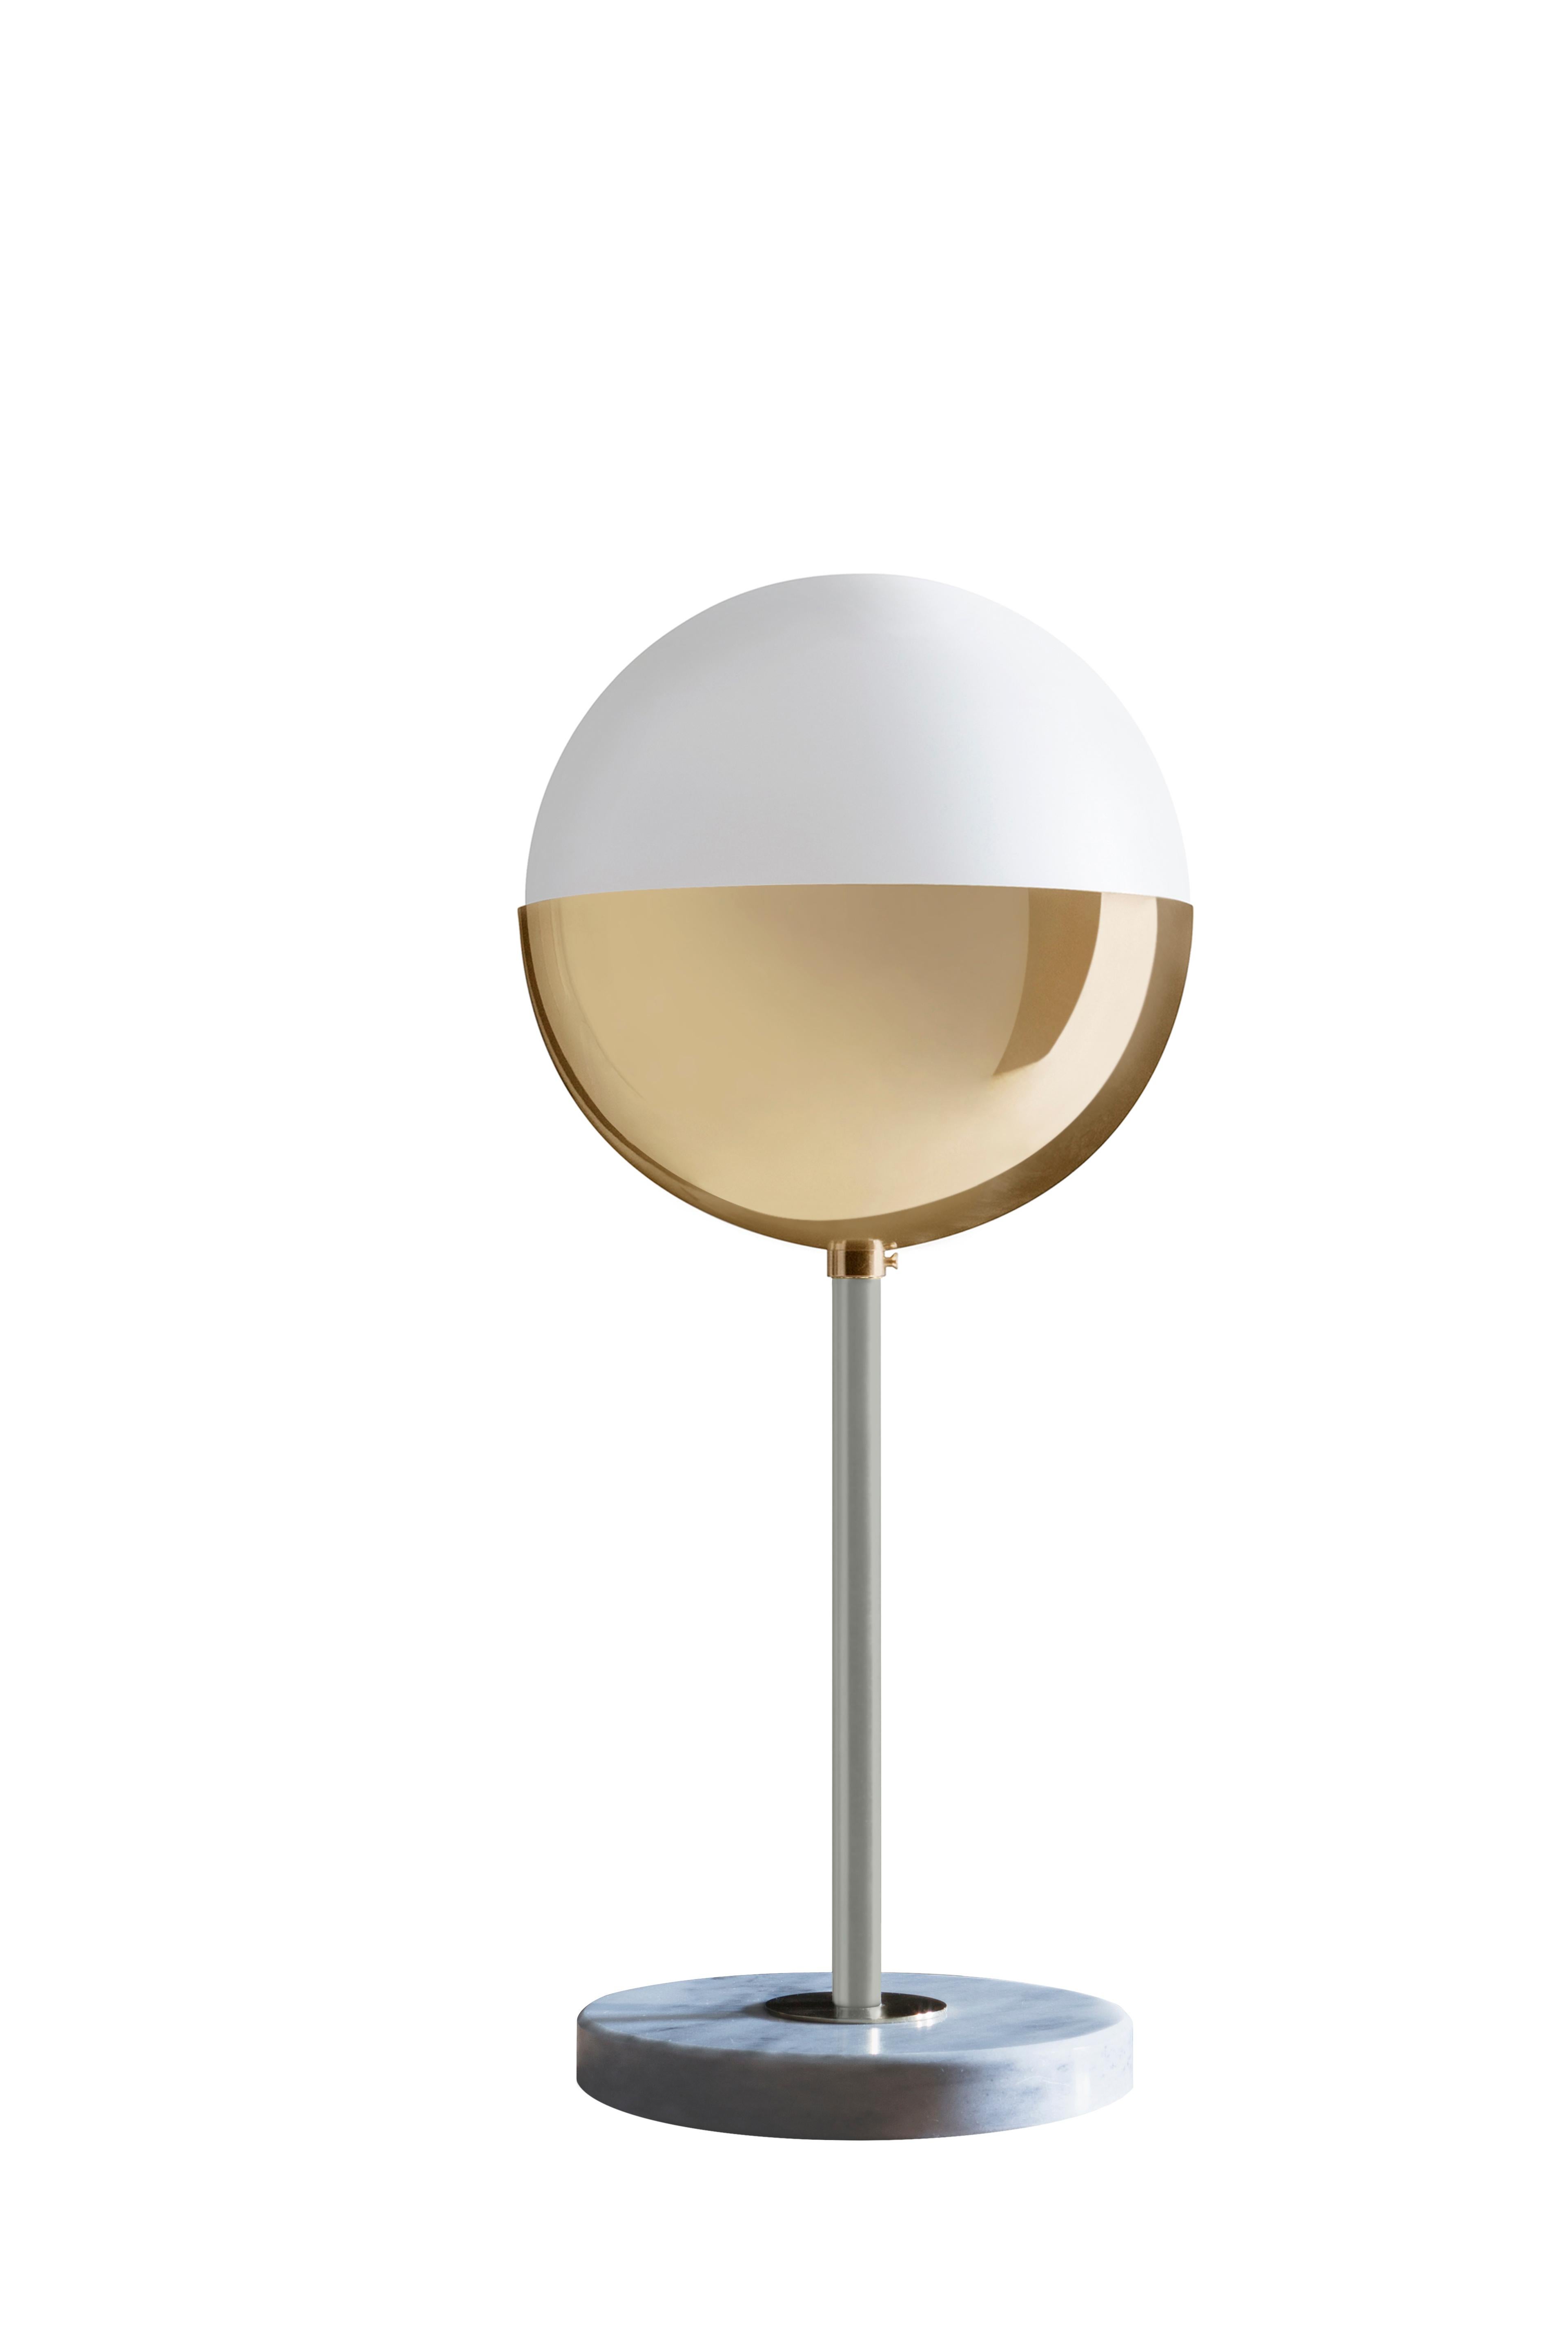 Marble table lamp 01 by Magic Circus Editions
Dimensions: H 50 x W 22 cm
 diameter spheres: 22 cm
Materials: Marble, Smooth brass, mouth blown glass
Dimmable version available. 
Available Finishes: Brass, nickel
Available colors (central